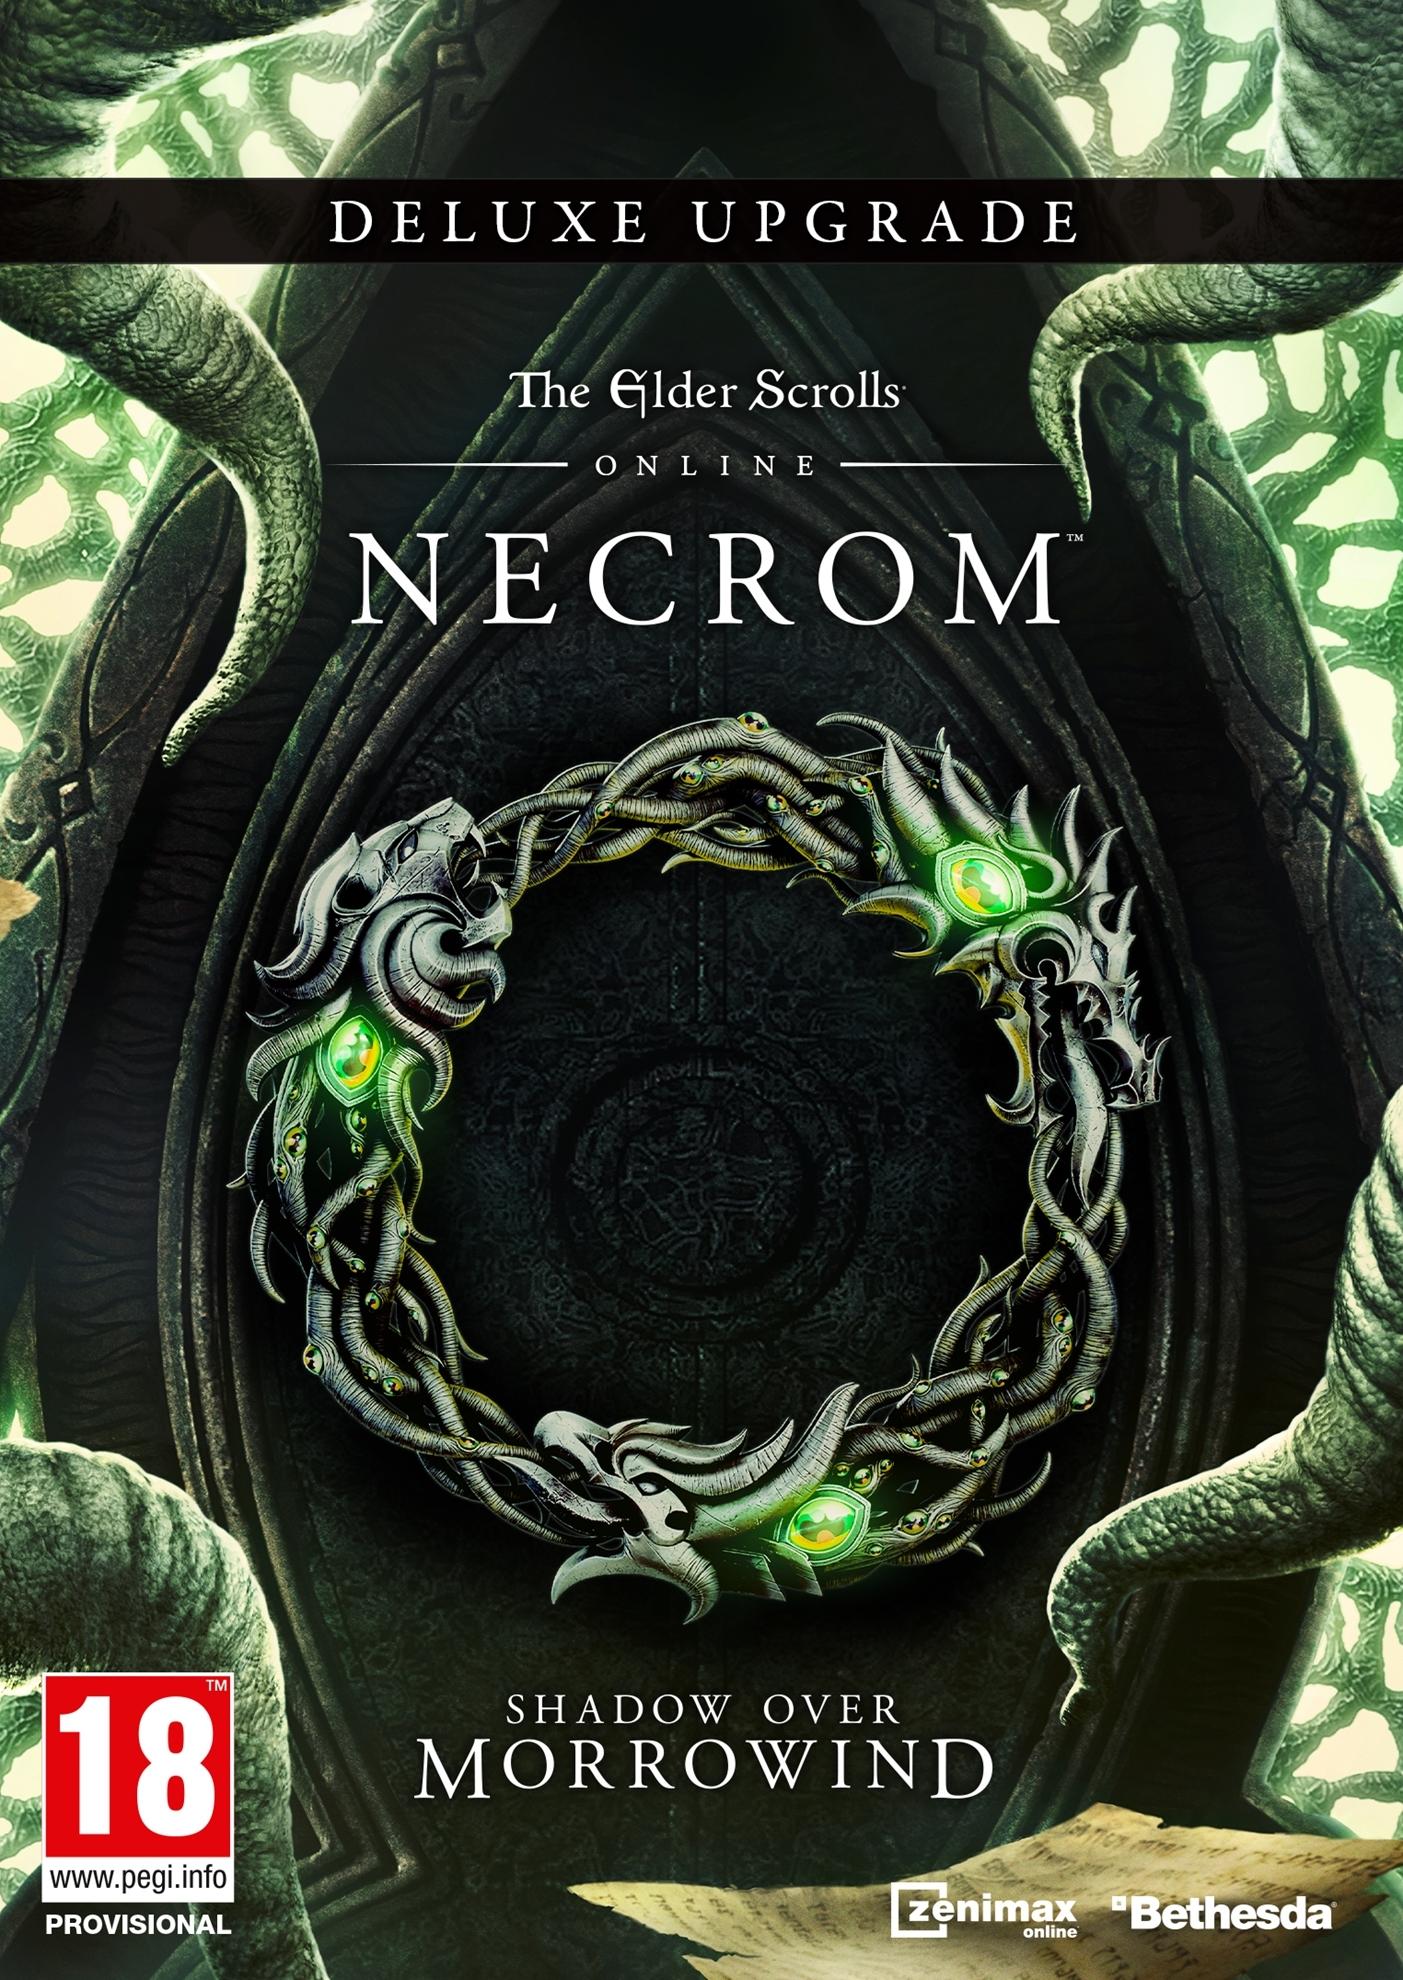 The Elder Scrolls Online Deluxe Upgrade: Necrom Limited Time Offer Pre Order (Steam) | Region 2 (0ee2a7eb-7dda-4570-bde2-1204aa40f18c)